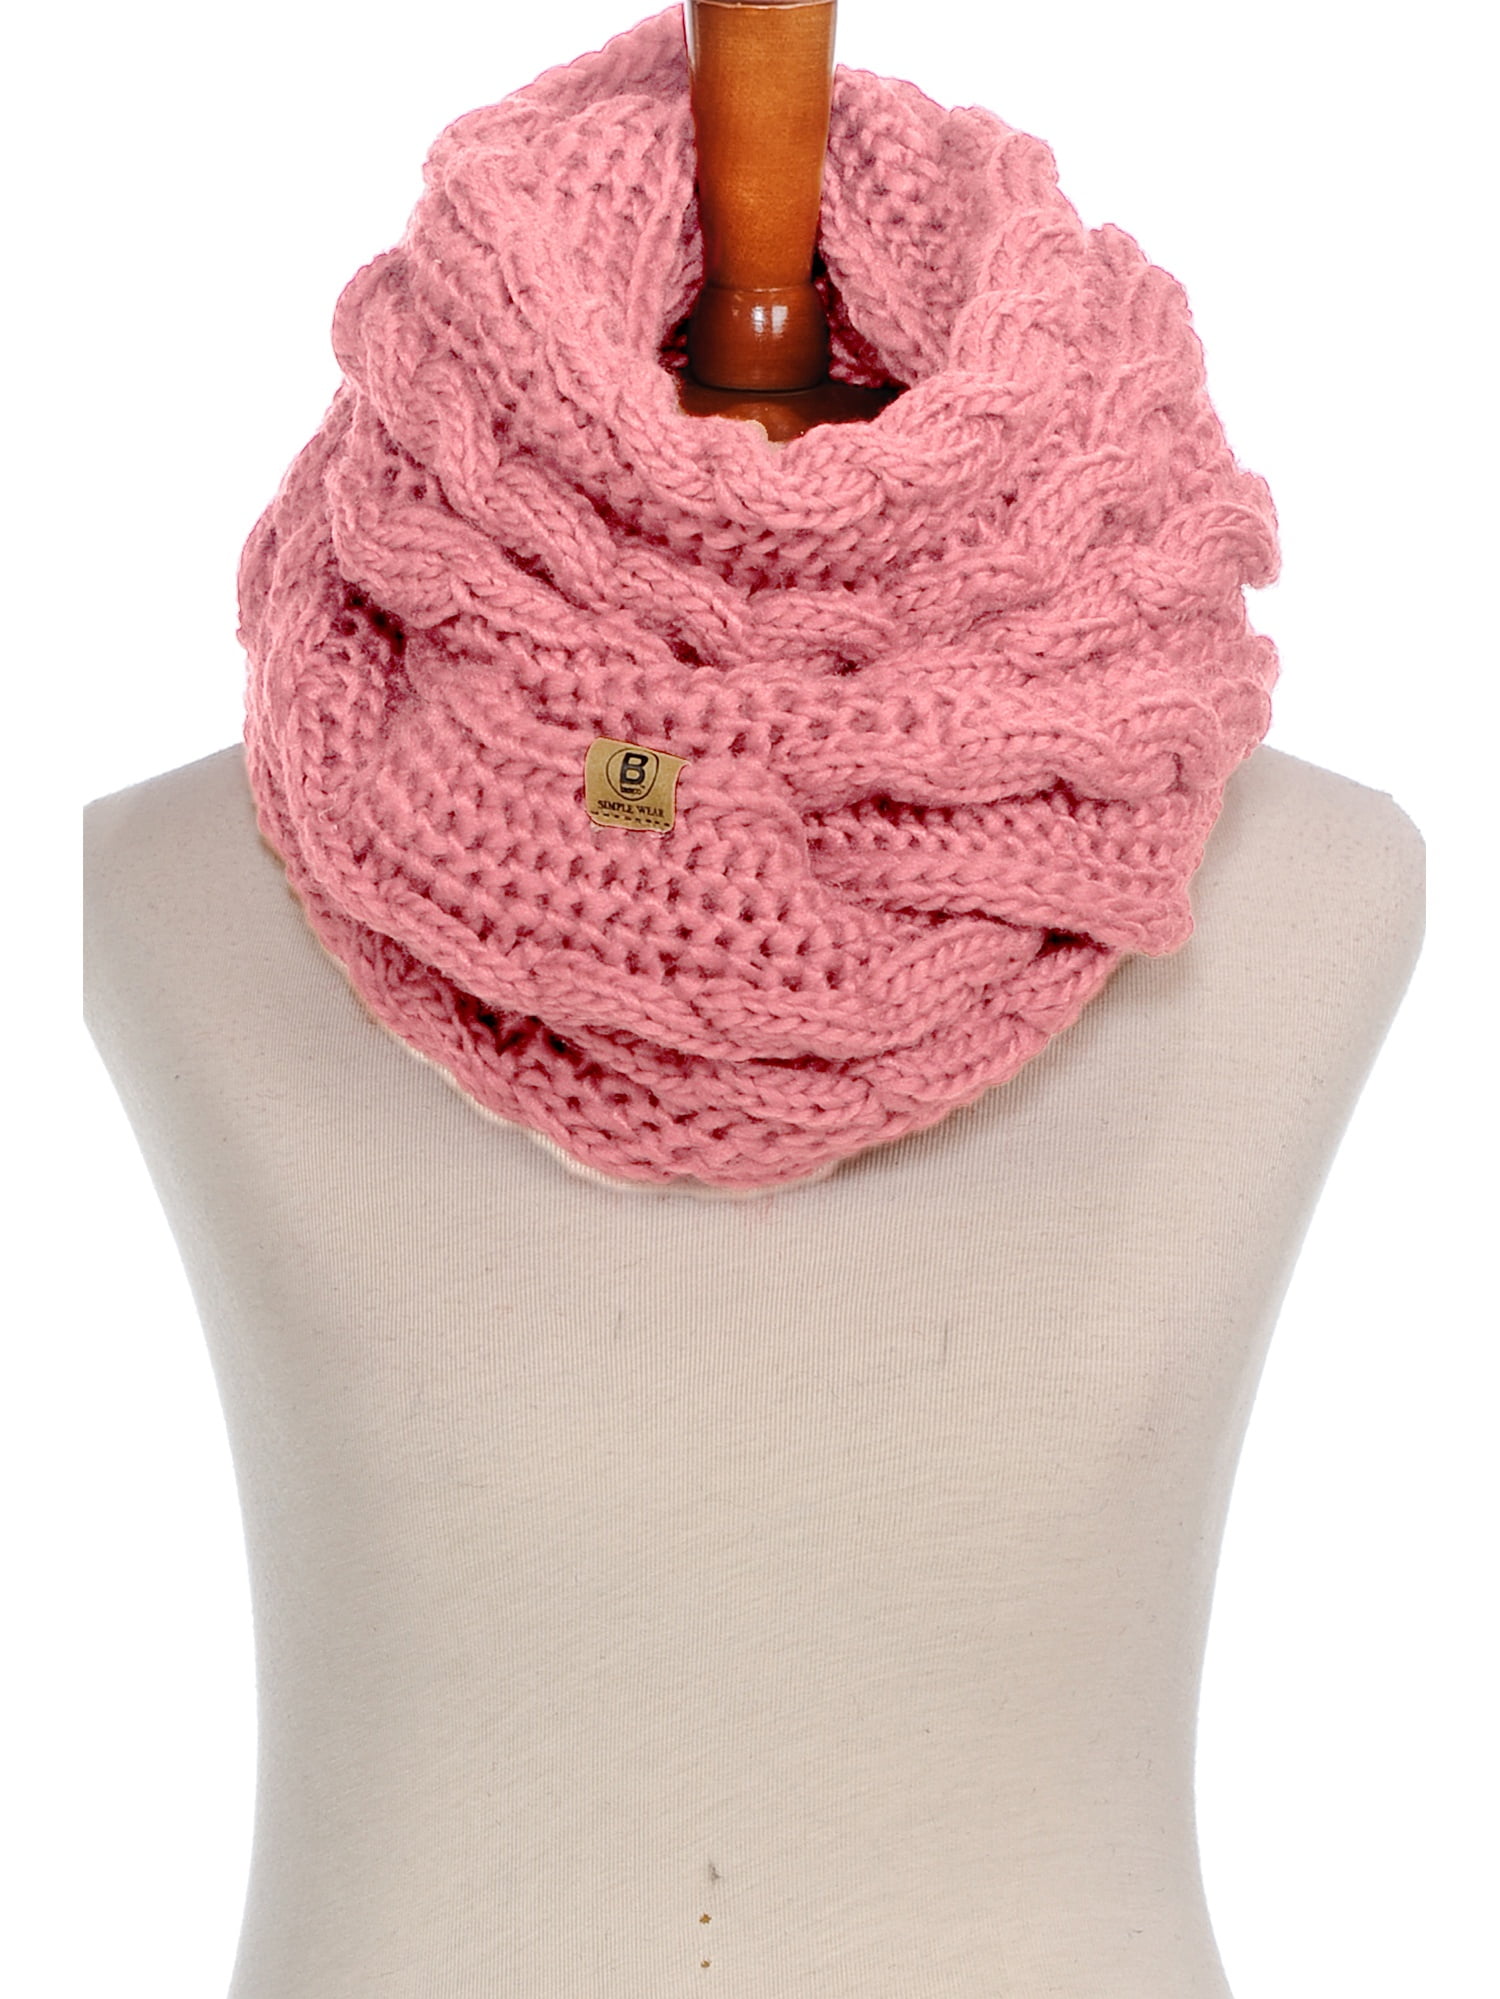 Chunky knit wool infinity scarf and mittens set women pink winter matching cowl infinty scarf snood neckwarmer mittens combo infinity loop